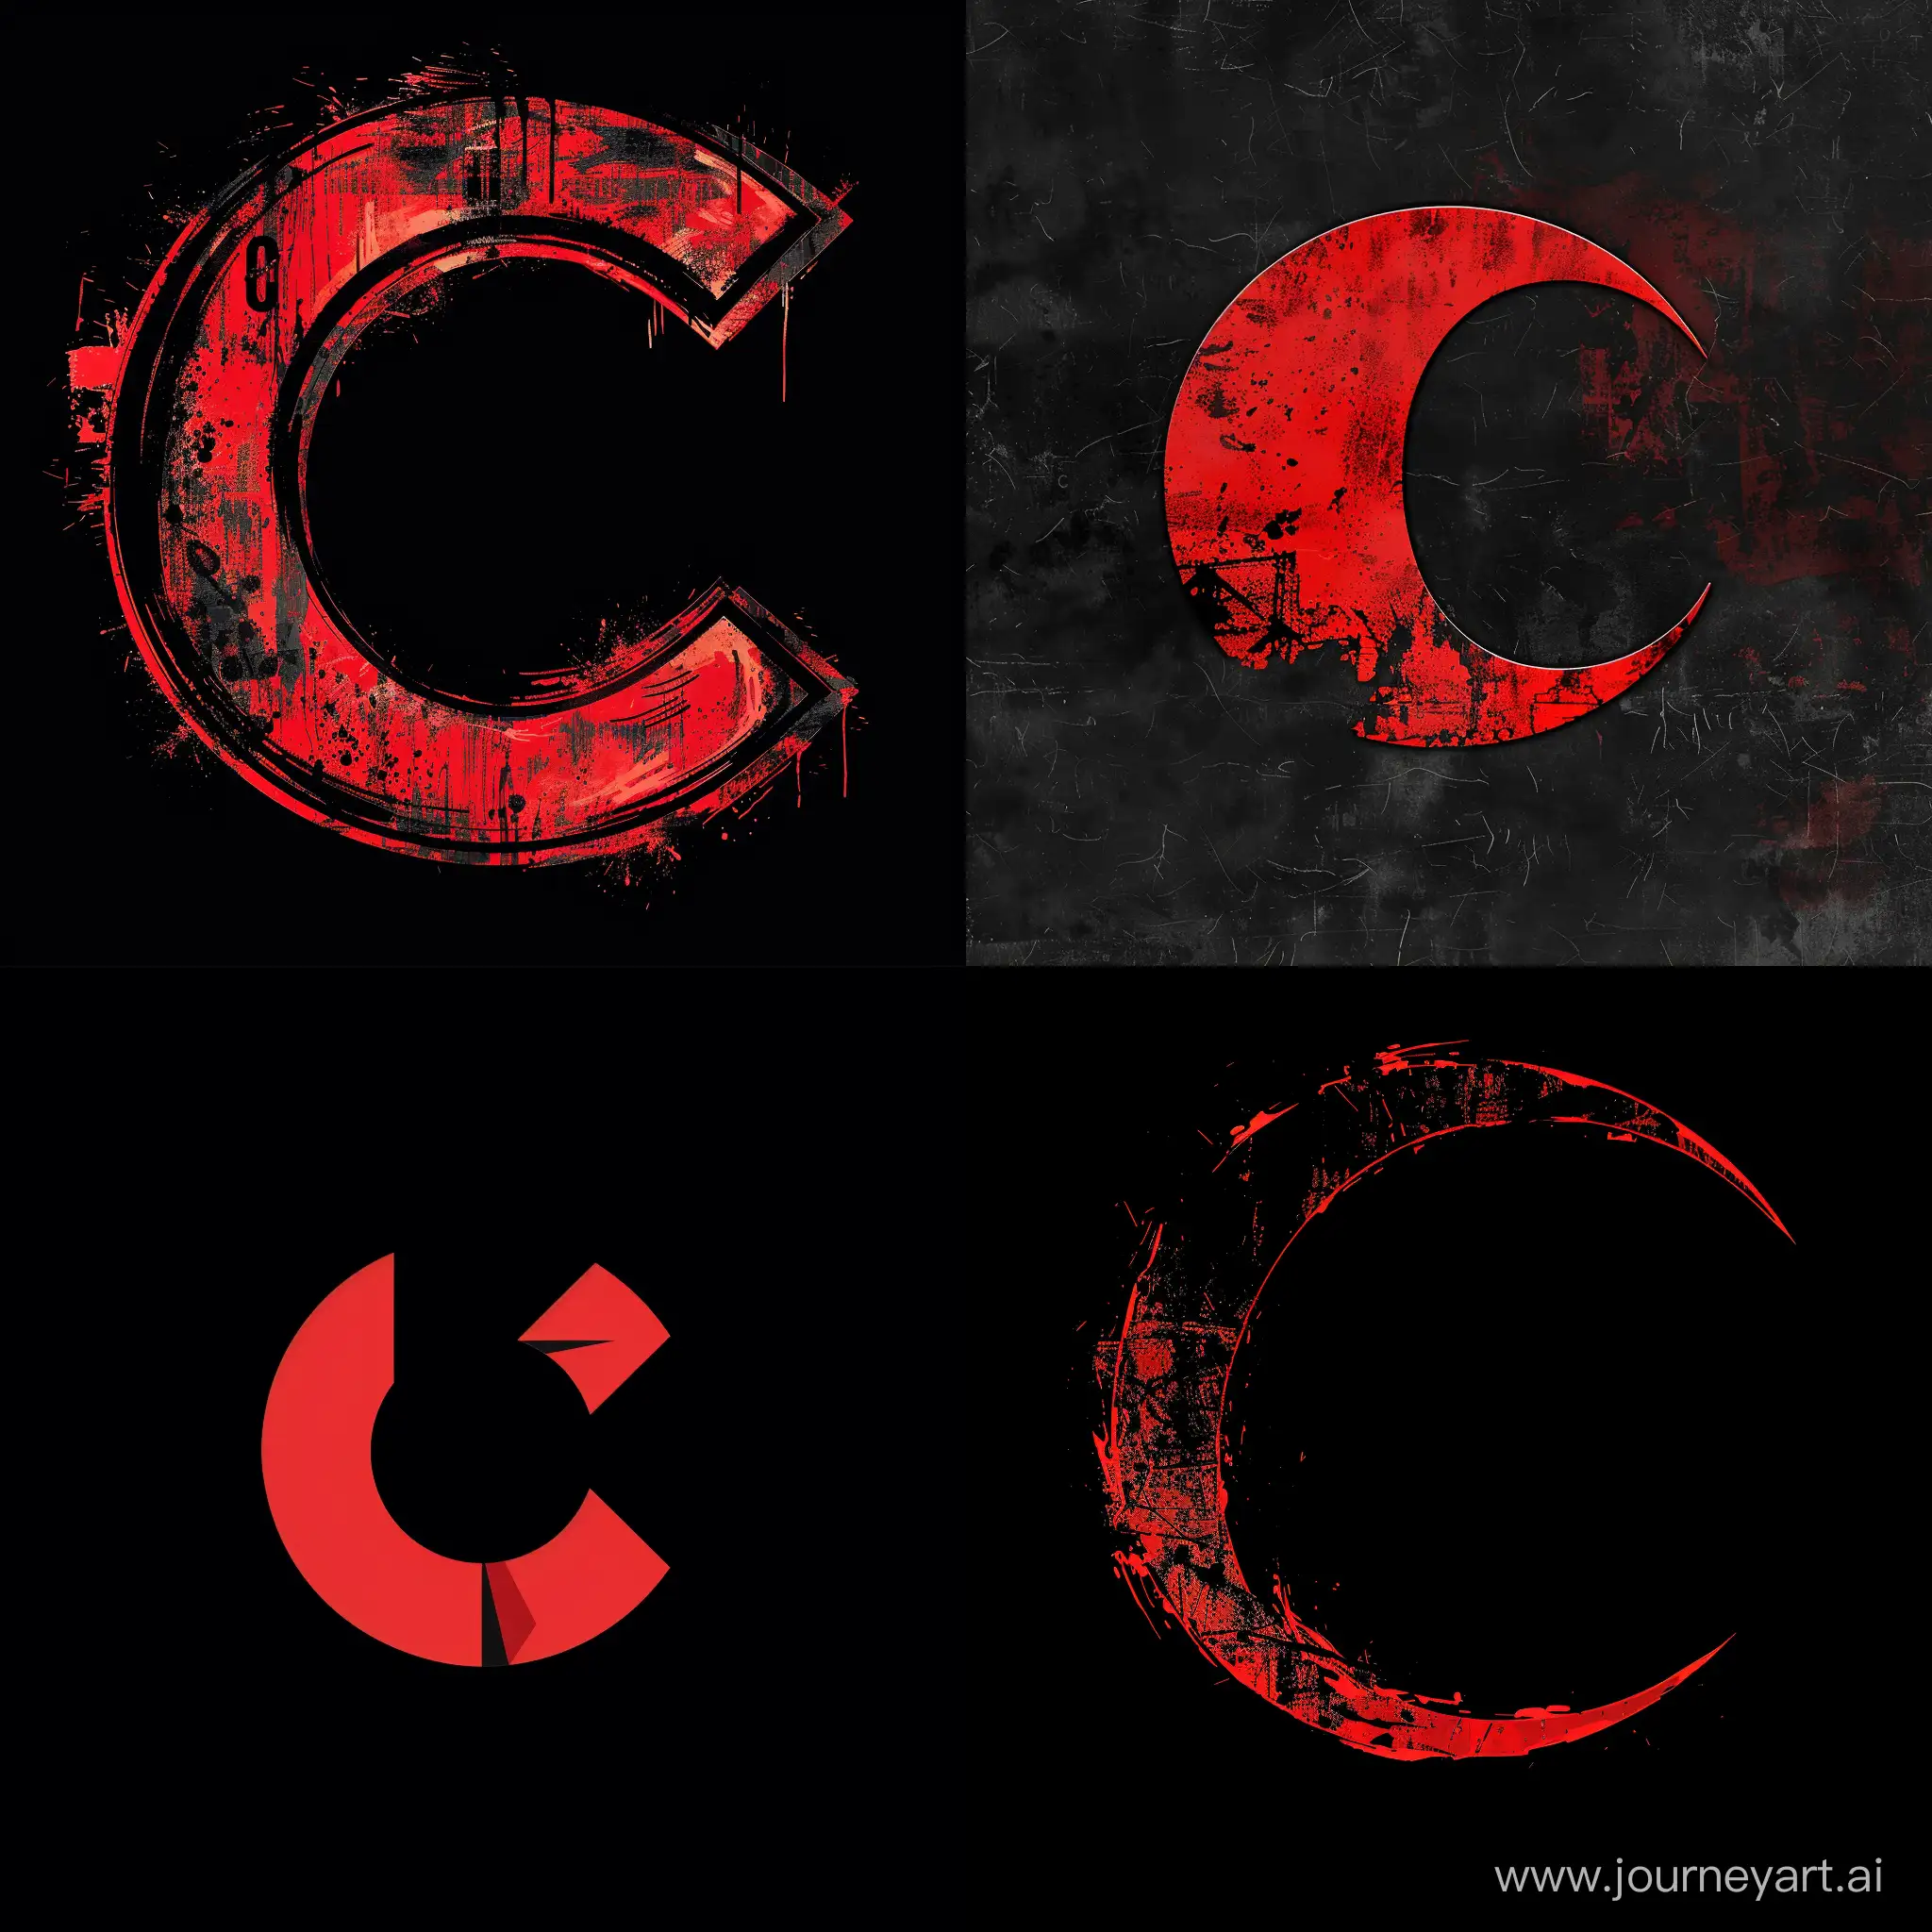 GENERATE LOGO WITH LETTER "C" IN KENTARO MIURA BERSERK STYLE. USE RED AND BLACK COLOURS MOSTLY